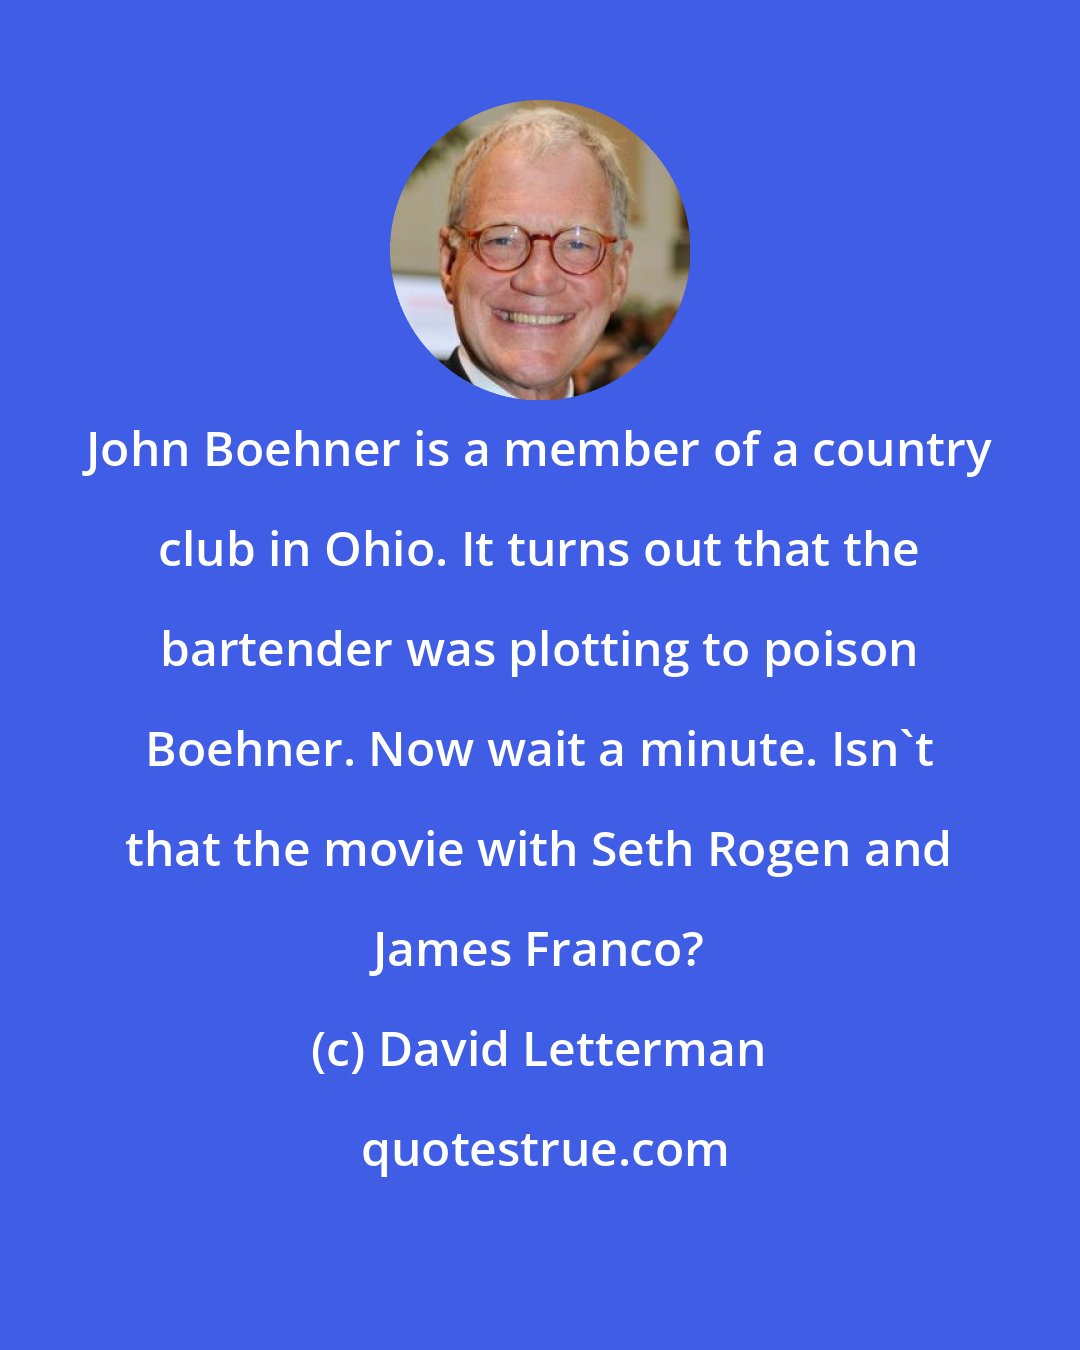 David Letterman: John Boehner is a member of a country club in Ohio. It turns out that the bartender was plotting to poison Boehner. Now wait a minute. Isn't that the movie with Seth Rogen and James Franco?